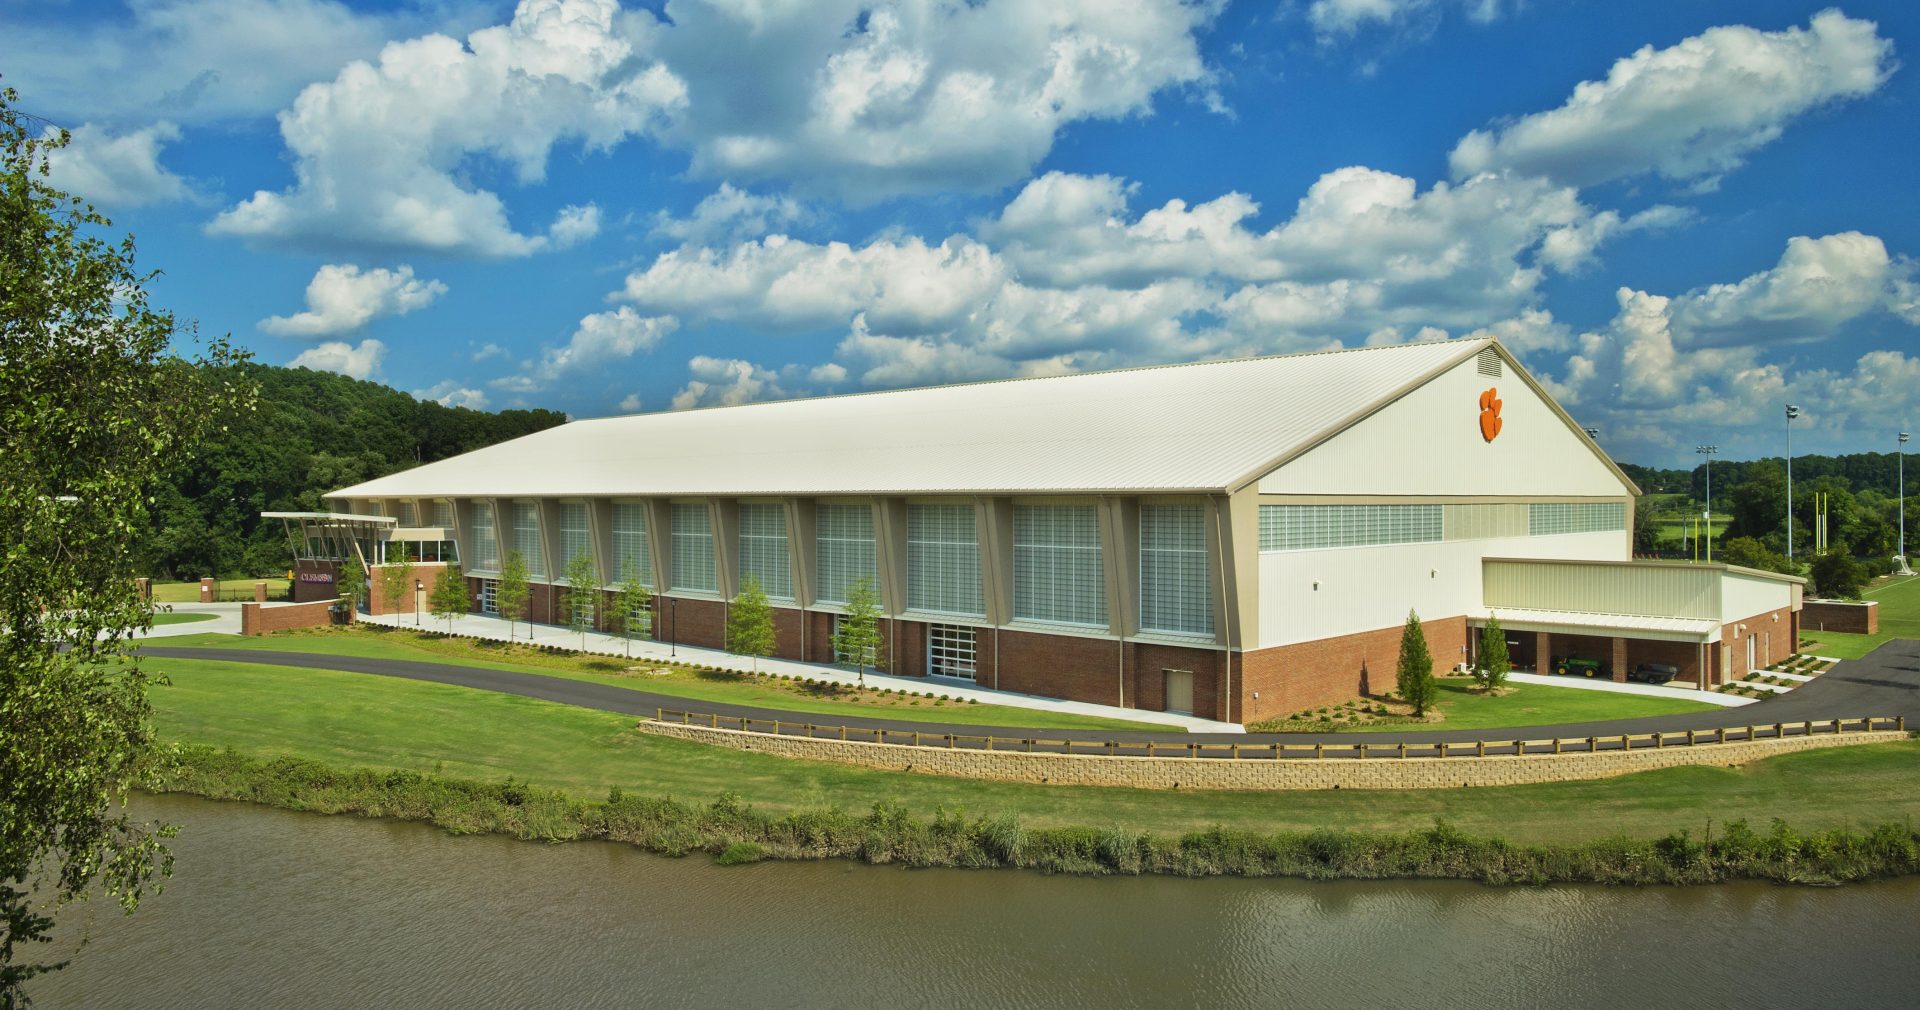 Clemson indoor football practice facility exterior under blue sky with clouds featuring wall of Kalwall translucent facades